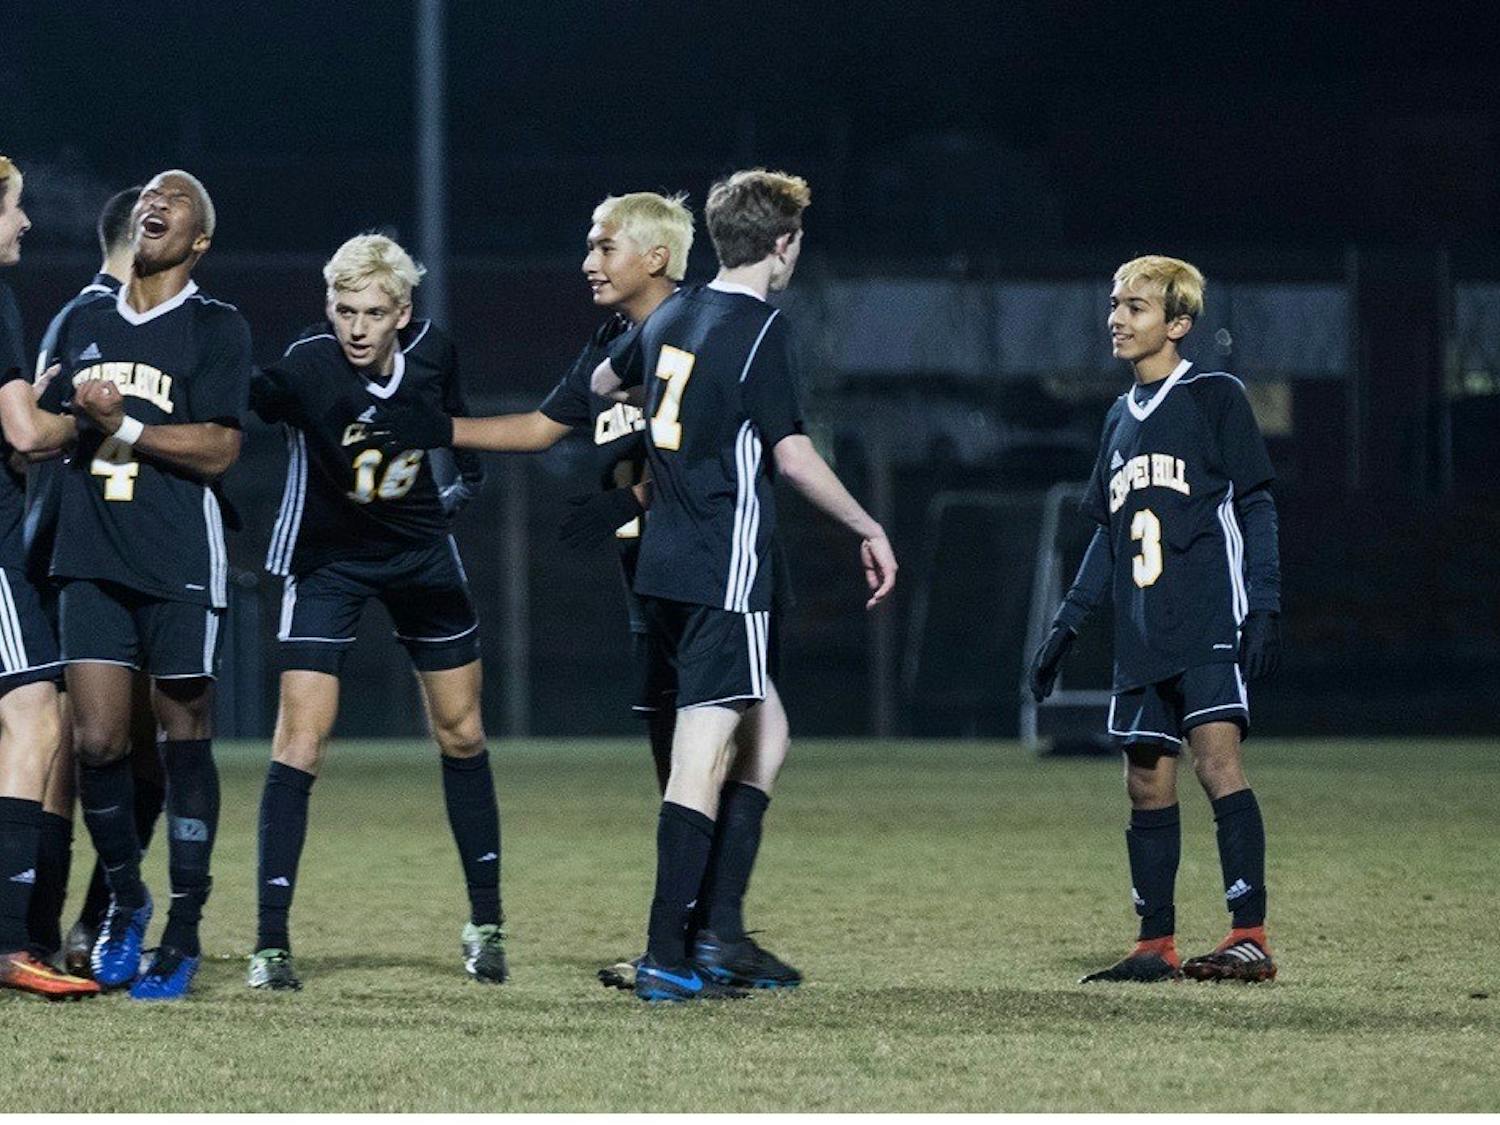 Members of the Chapel Hill High School boy's soccer team celebrate during a game. Photo courtesy of Bryant Davis Jr.